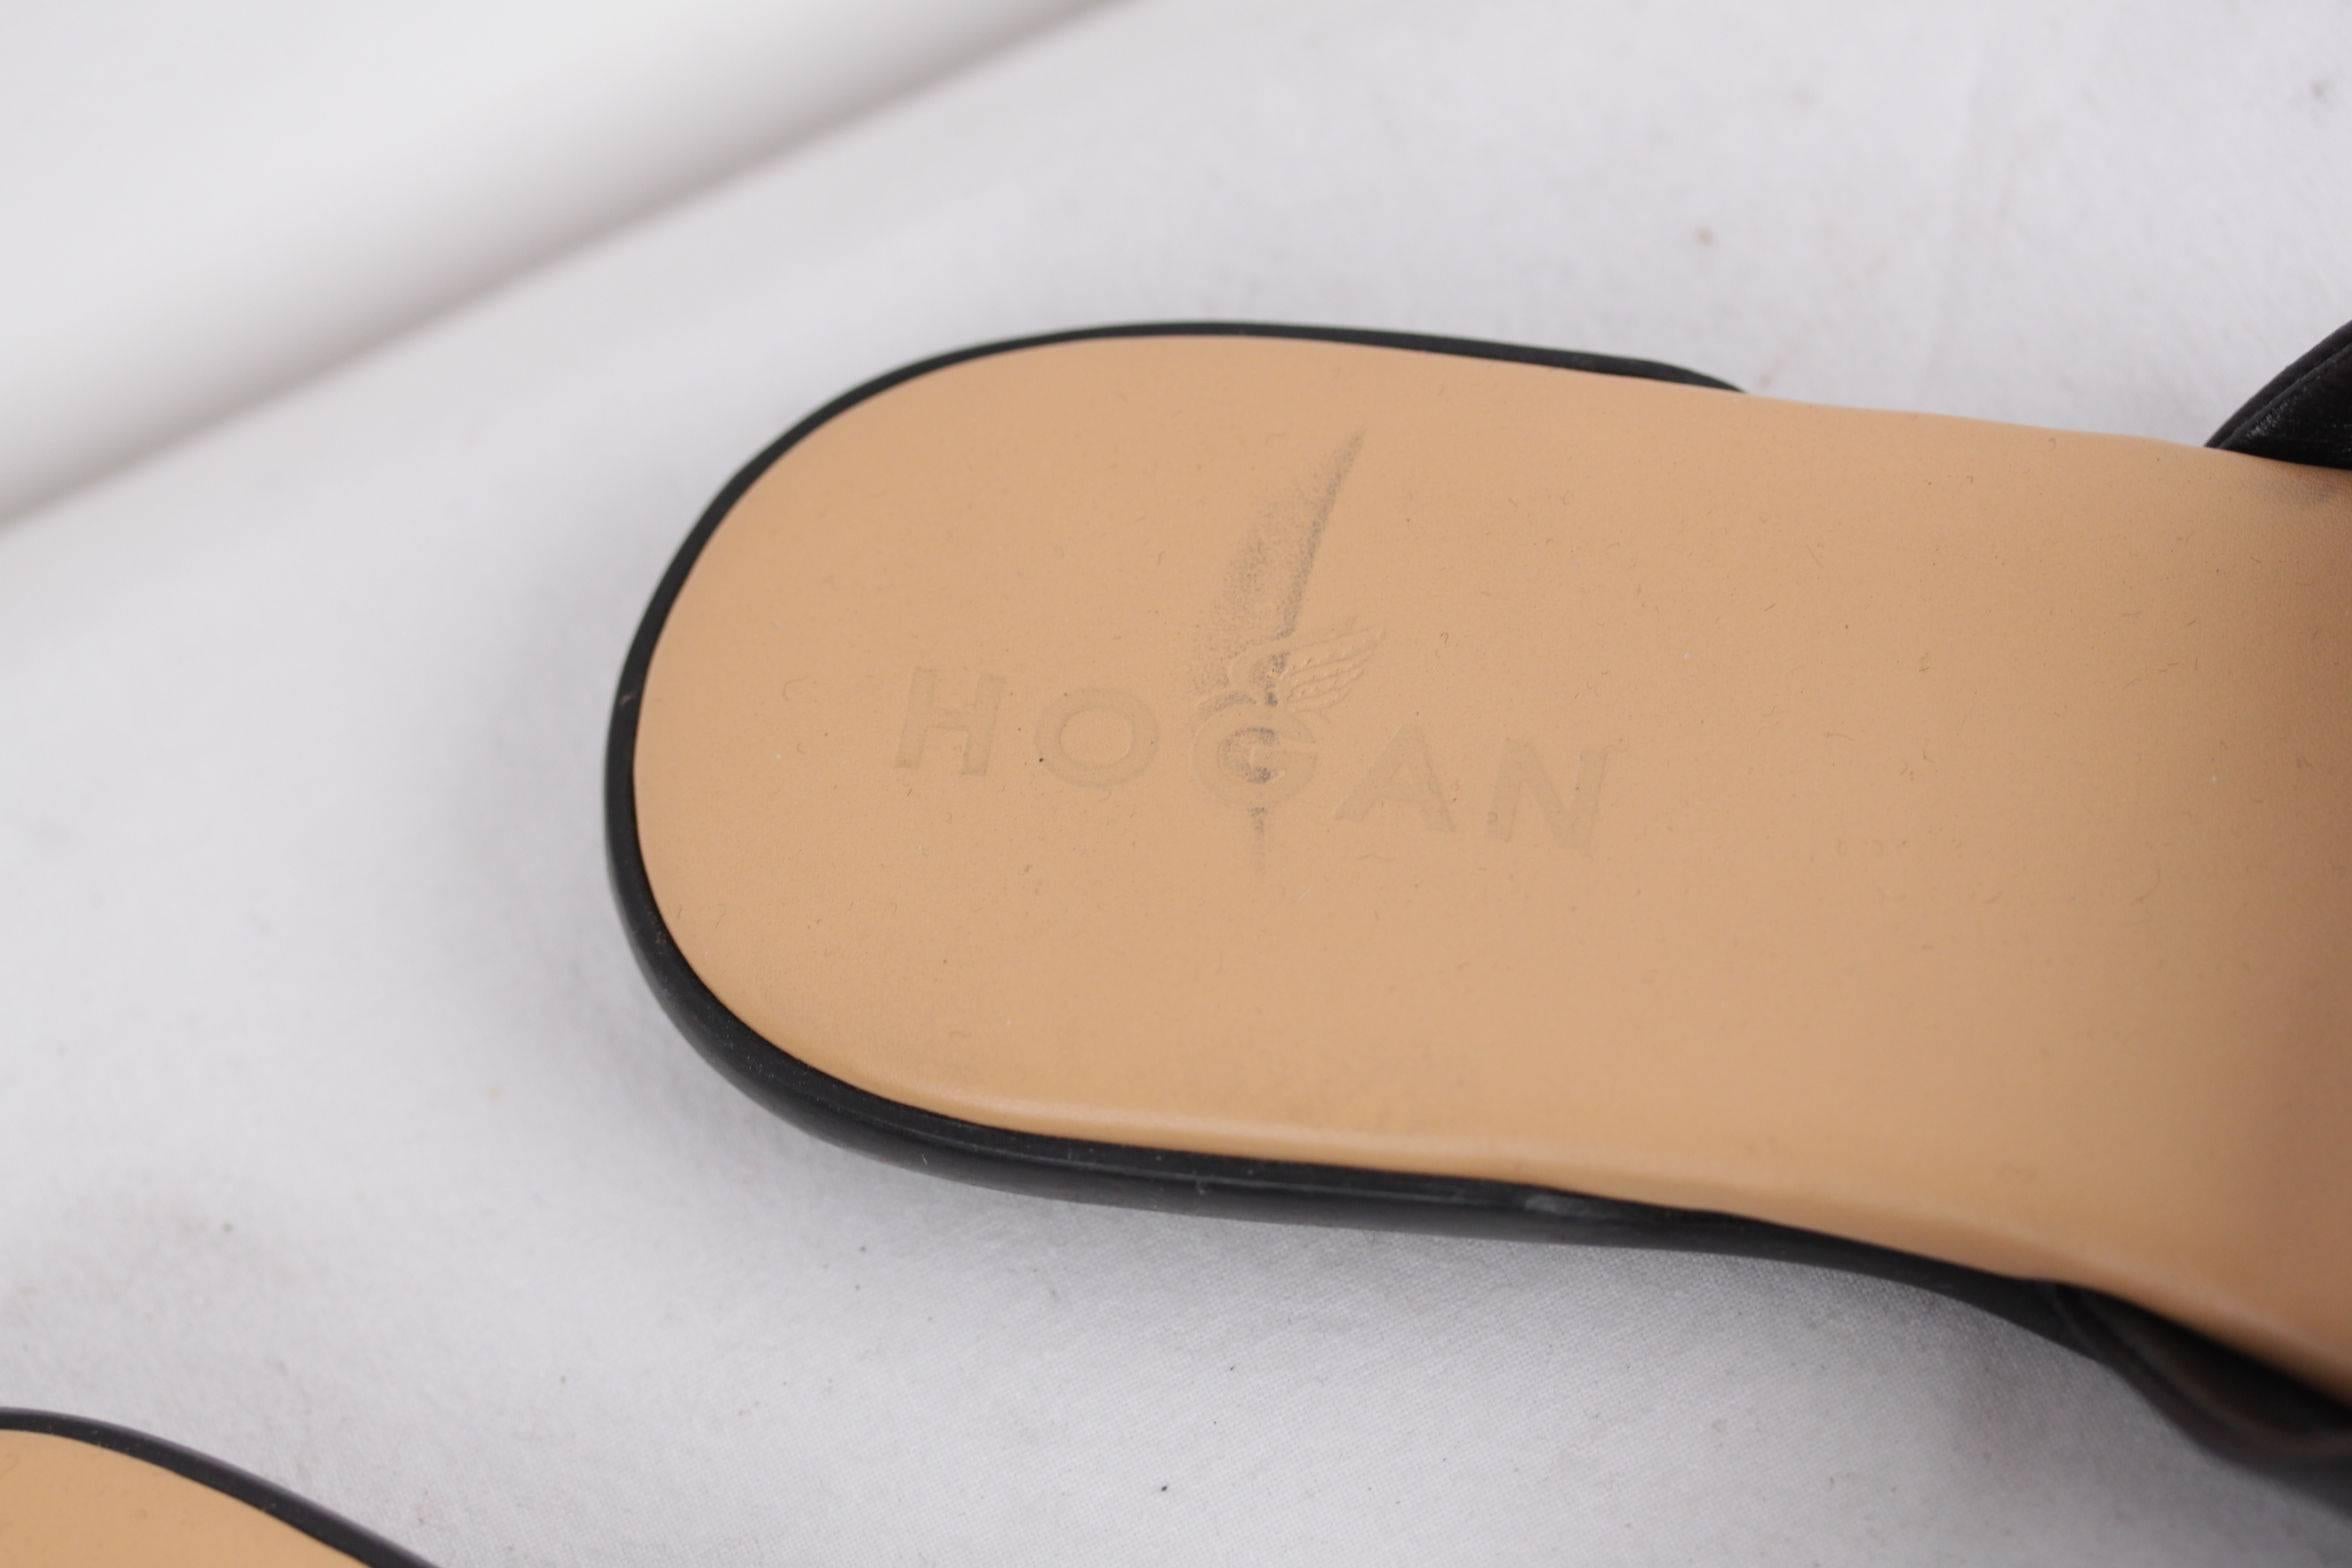 Brand: HOGAN - Made in Italy

Condition (please read our condition chart below): EXCELLENT CONDITION: Very little wear, no visible defect. It has been used, but not often.

Condition details: Gently used! Minimal wear of use on the outsoles, minimal